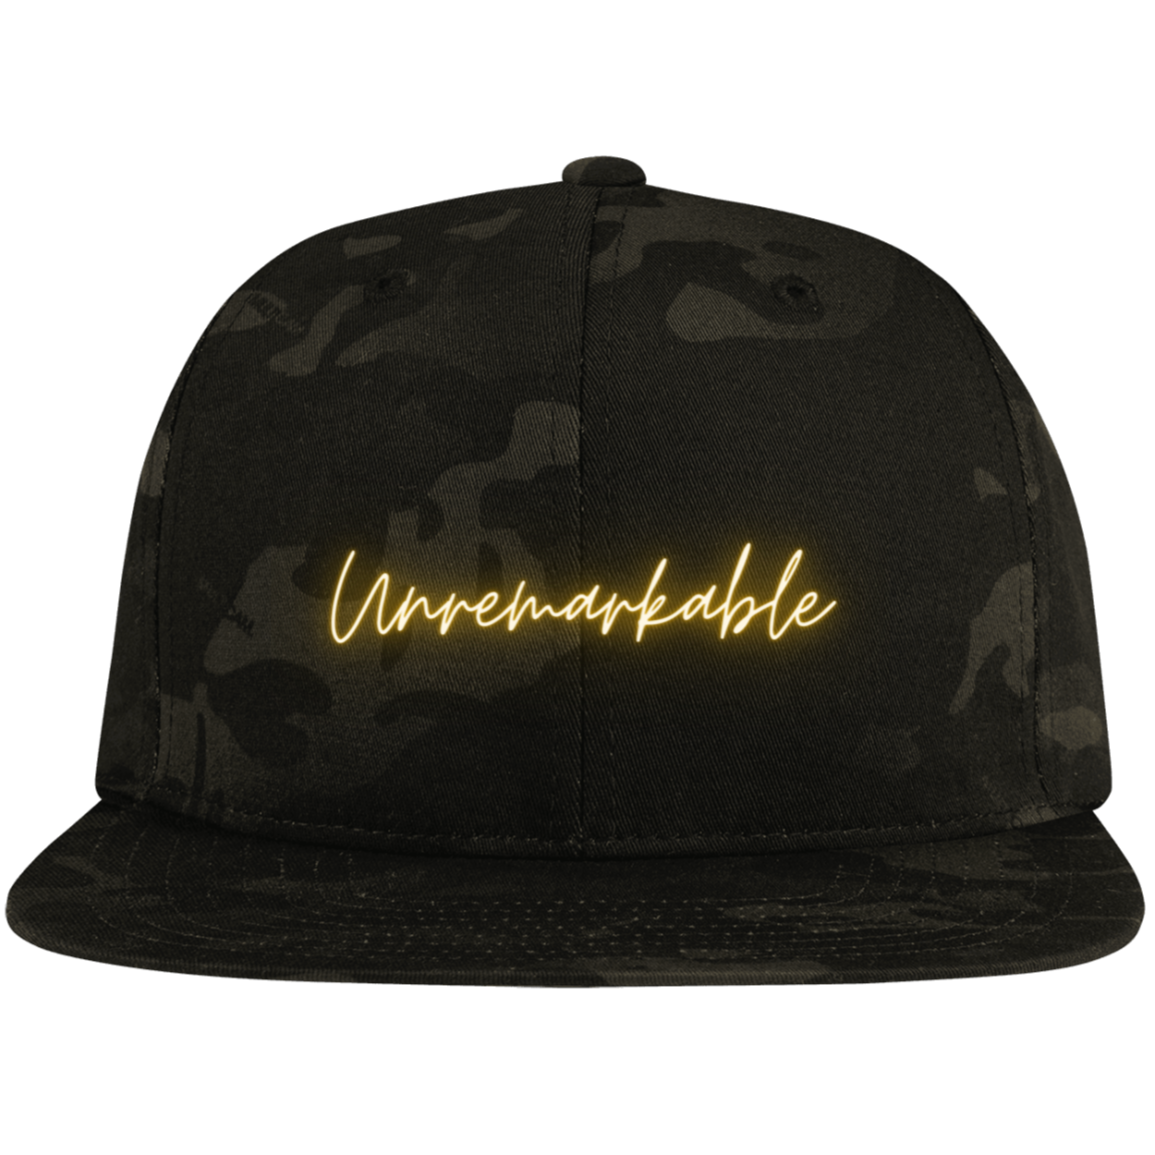 Unremarkable  Embroidered Flat Bill High-Profile Snapback Hat